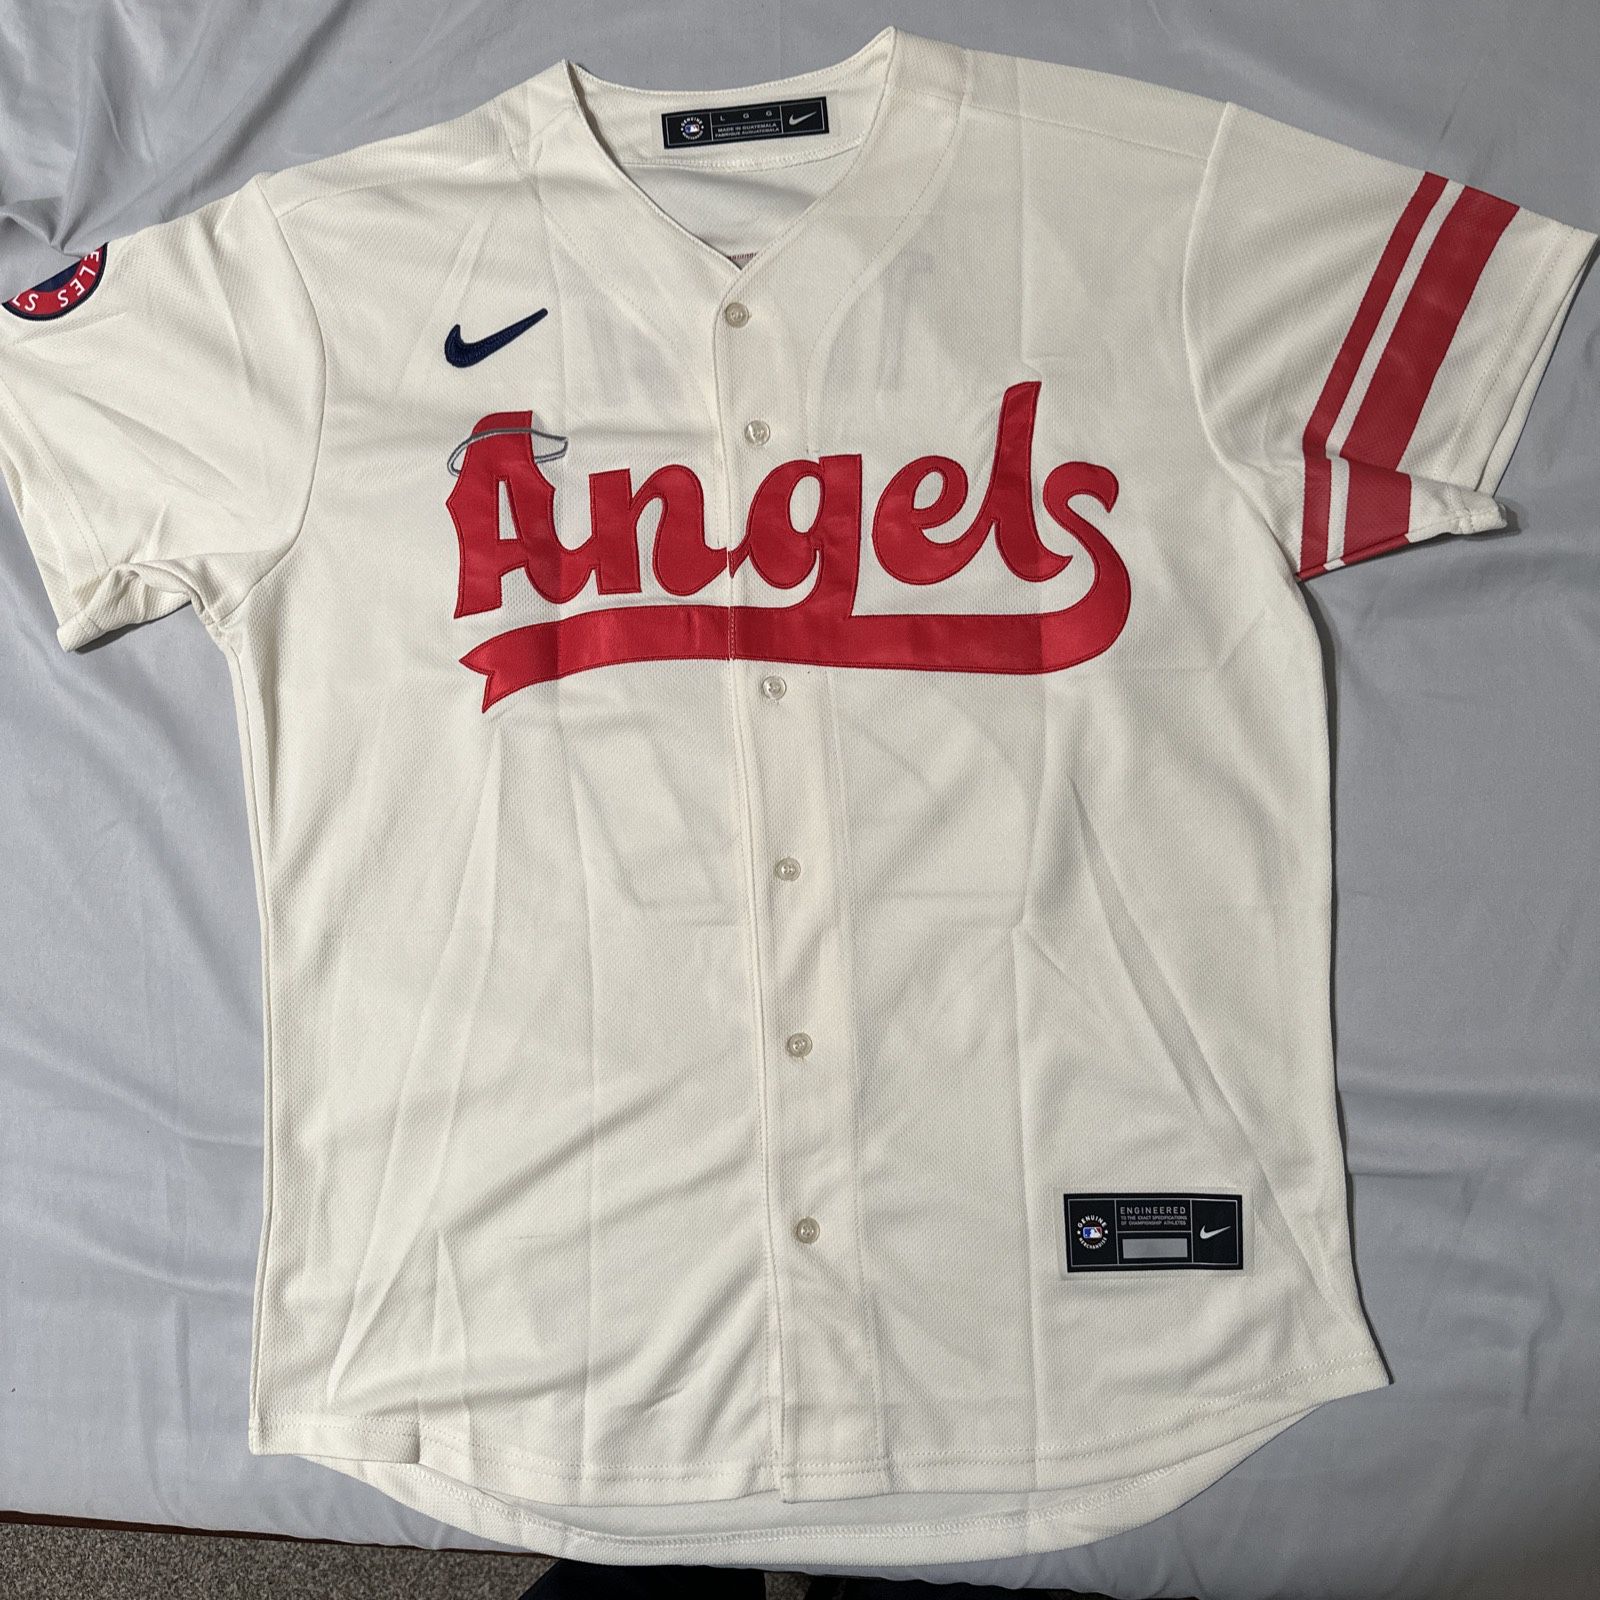 Mike Trout Jersey City Connect New for Sale in Diamond Bar, CA - OfferUp